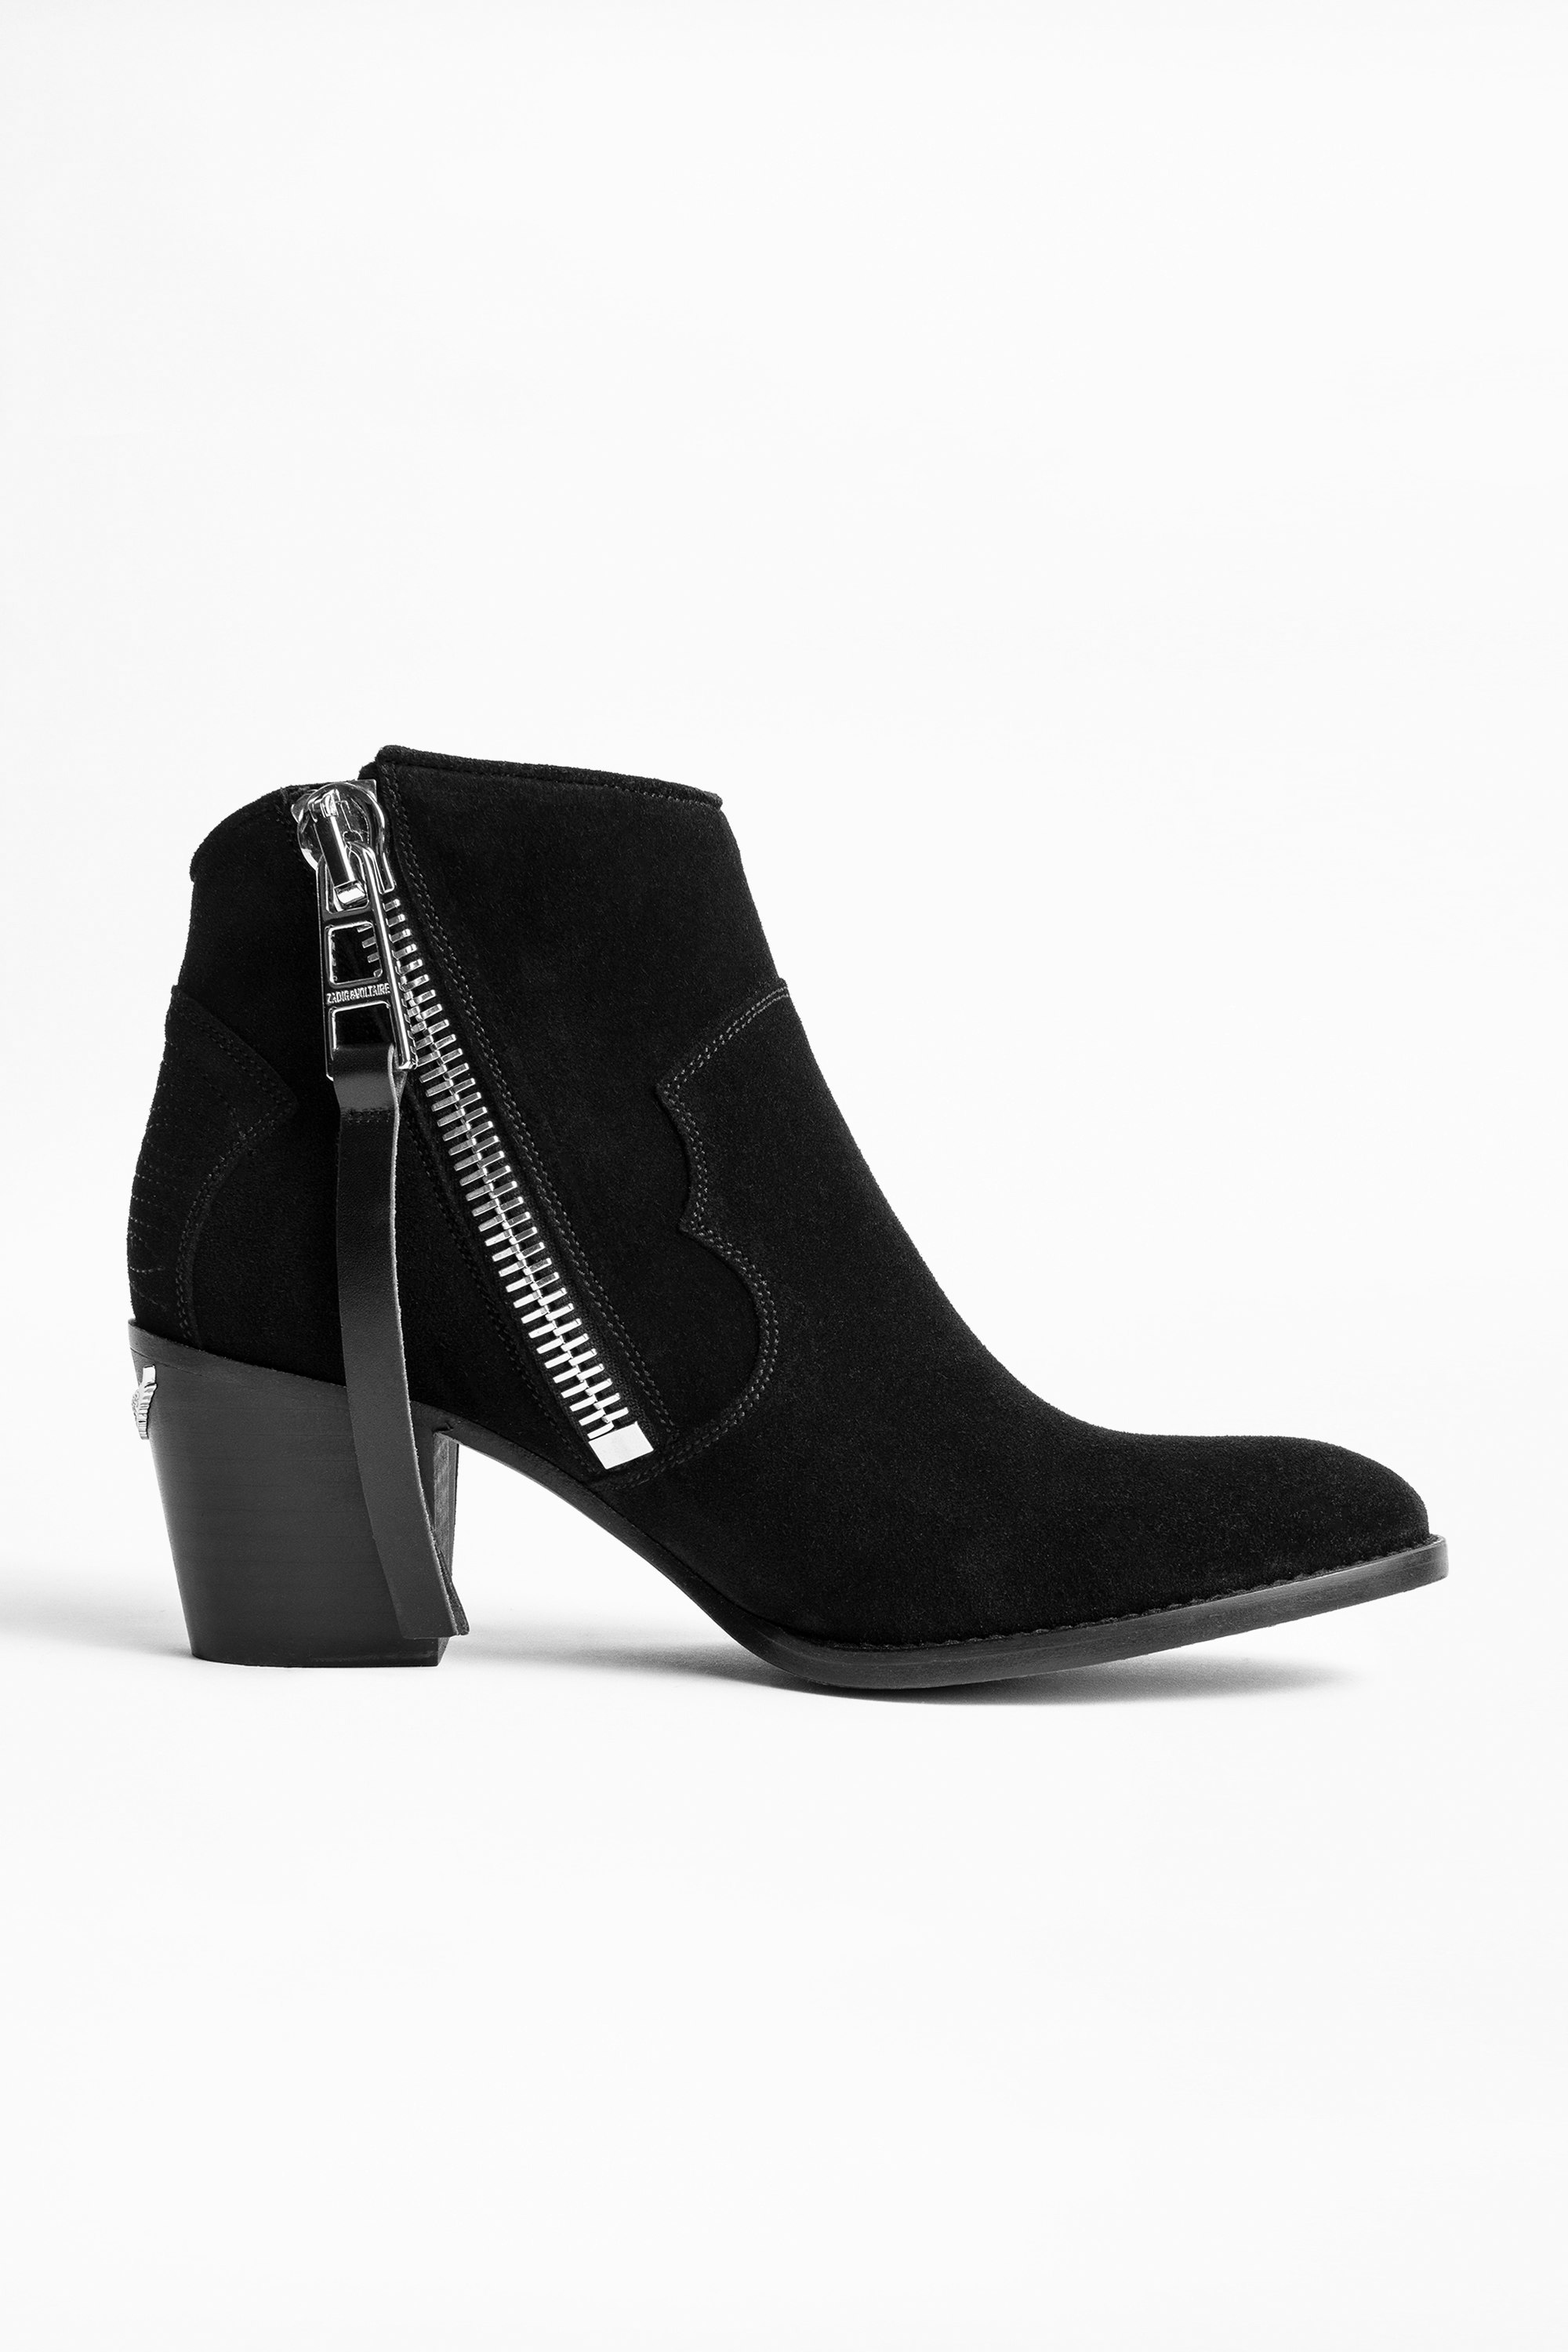 Molly Suede Zip Ankle Boots - Women’s black heeled ankle boots in suede leather.